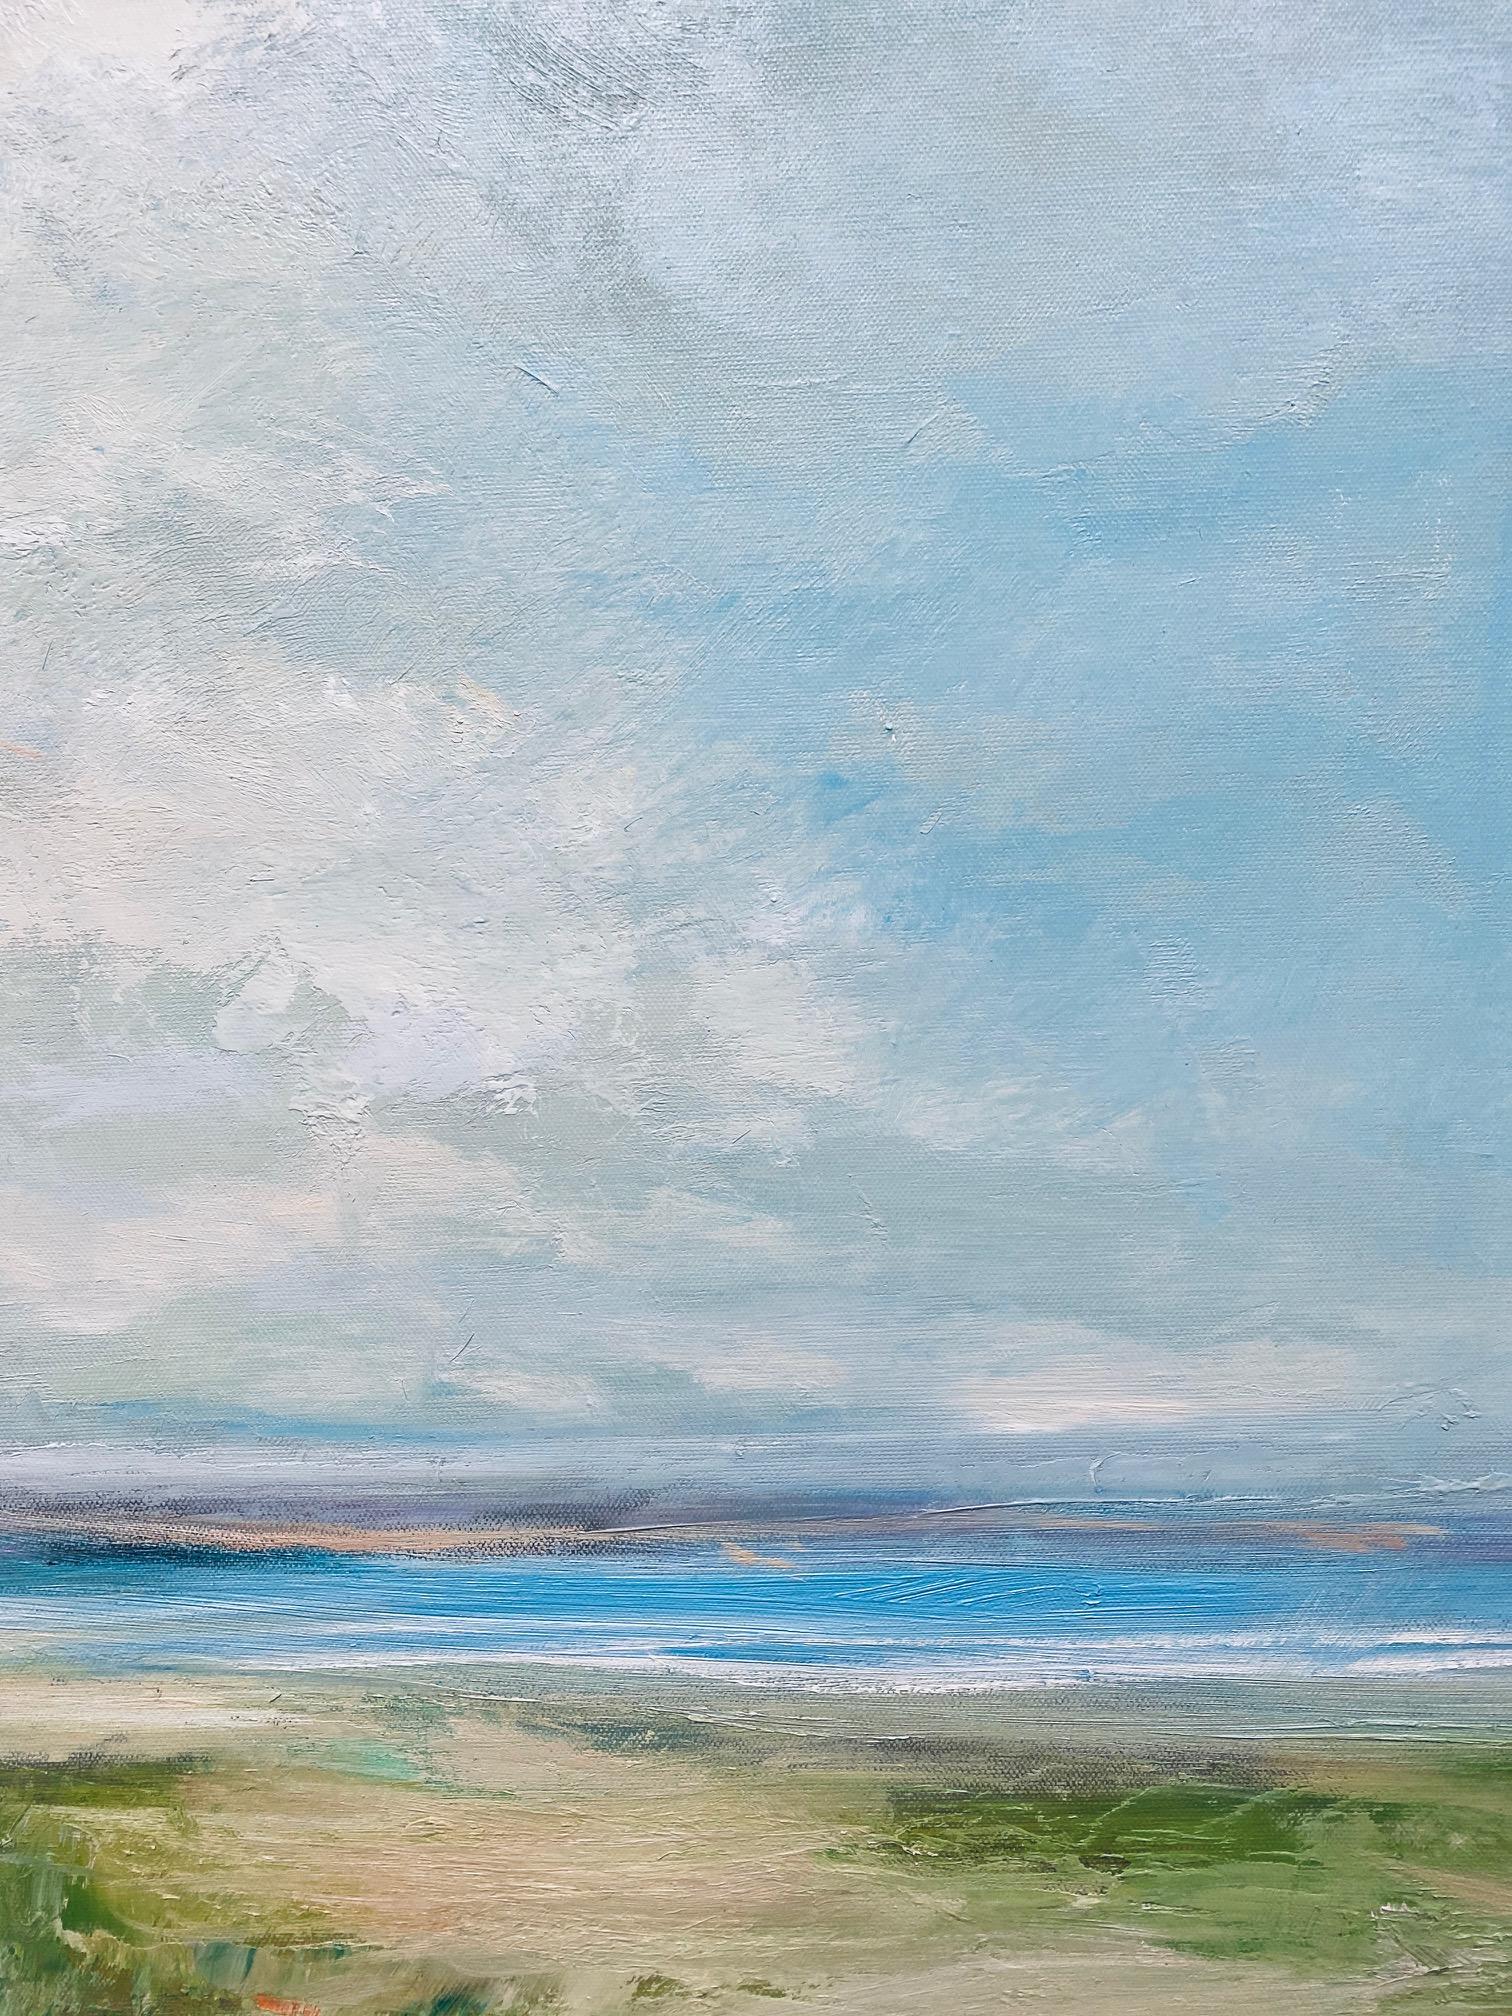 The contrast between the delicate white statice growing along the dunes and the powerful pull of the sea, even on a quiet day with calm tide, captures the imagination.  This 36x36 contemporary marine landscape offers the  feelings of  soft summer